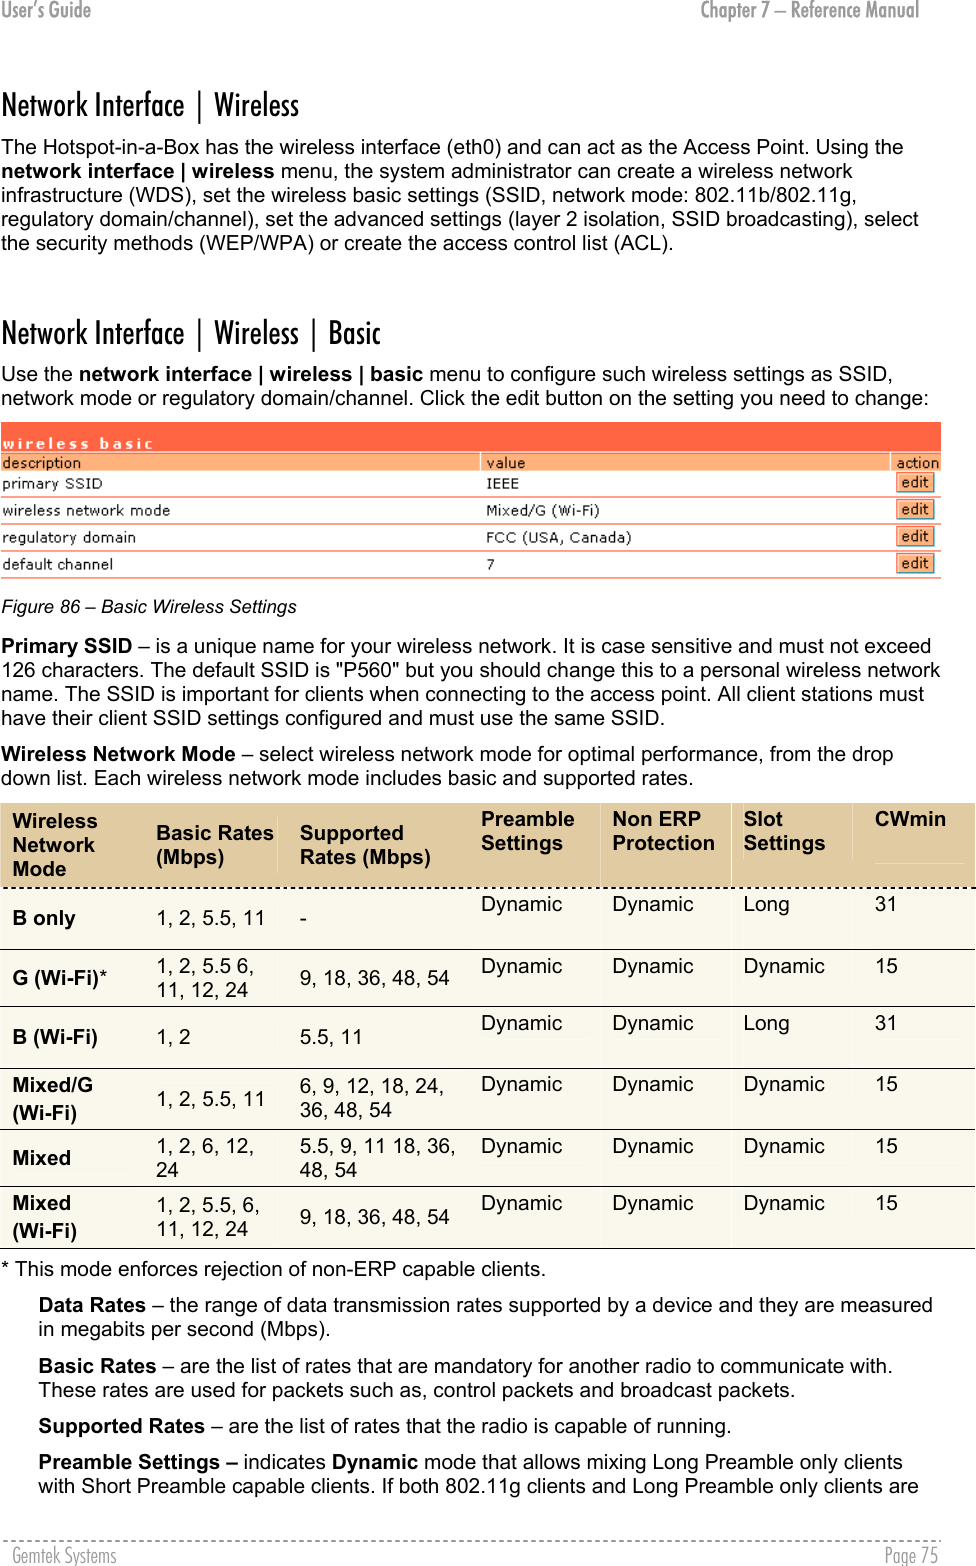 User’s Guide  Chapter 7 – Reference Manual Network Interface | Wireless The Hotspot-in-a-Box has the wireless interface (eth0) and can act as the Access Point. Using the network interface | wireless menu, the system administrator can create a wireless network infrastructure (WDS), set the wireless basic settings (SSID, network mode: 802.11b/802.11g, regulatory domain/channel), set the advanced settings (layer 2 isolation, SSID broadcasting), select the security methods (WEP/WPA) or create the access control list (ACL).  Network Interface | Wireless | Basic Use the network interface | wireless | basic menu to configure such wireless settings as SSID, network mode or regulatory domain/channel. Click the edit button on the setting you need to change:  Figure 86 – Basic Wireless Settings Primary SSID – is a unique name for your wireless network. It is case sensitive and must not exceed 126 characters. The default SSID is &quot;P560&quot; but you should change this to a personal wireless network name. The SSID is important for clients when connecting to the access point. All client stations must have their client SSID settings configured and must use the same SSID. Wireless Network Mode – select wireless network mode for optimal performance, from the drop down list. Each wireless network mode includes basic and supported rates.  Wireless Network Mode Basic Rates (Mbps) Supported Rates (Mbps) Preamble Settings  Non ERP Protection Slot Settings CWmin  B only  1, 2, 5.5, 11  -  Dynamic  Dynamic  Long  31  G (Wi-Fi)* 1, 2, 5.5 6, 11, 12, 24   9, 18, 36, 48, 54   Dynamic  Dynamic  Dynamic  15 B (Wi-Fi)  1, 2  5.5, 11  Dynamic  Dynamic  Long  31 Mixed/G (Wi-Fi)  1, 2, 5.5, 11  6, 9, 12, 18, 24, 36, 48, 54 Dynamic  Dynamic  Dynamic  15 Mixed   1, 2, 6, 12, 24 5.5, 9, 11 18, 36, 48, 54 Dynamic  Dynamic  Dynamic  15 Mixed  (Wi-Fi) 1, 2, 5.5, 6, 11, 12, 24  9, 18, 36, 48, 54  Dynamic  Dynamic  Dynamic  15 * This mode enforces rejection of non-ERP capable clients. Data Rates – the range of data transmission rates supported by a device and they are measured in megabits per second (Mbps).  Basic Rates – are the list of rates that are mandatory for another radio to communicate with. These rates are used for packets such as, control packets and broadcast packets.  Supported Rates – are the list of rates that the radio is capable of running. Preamble Settings – indicates Dynamic mode that allows mixing Long Preamble only clients with Short Preamble capable clients. If both 802.11g clients and Long Preamble only clients are Gemtek Systems    Page 75  